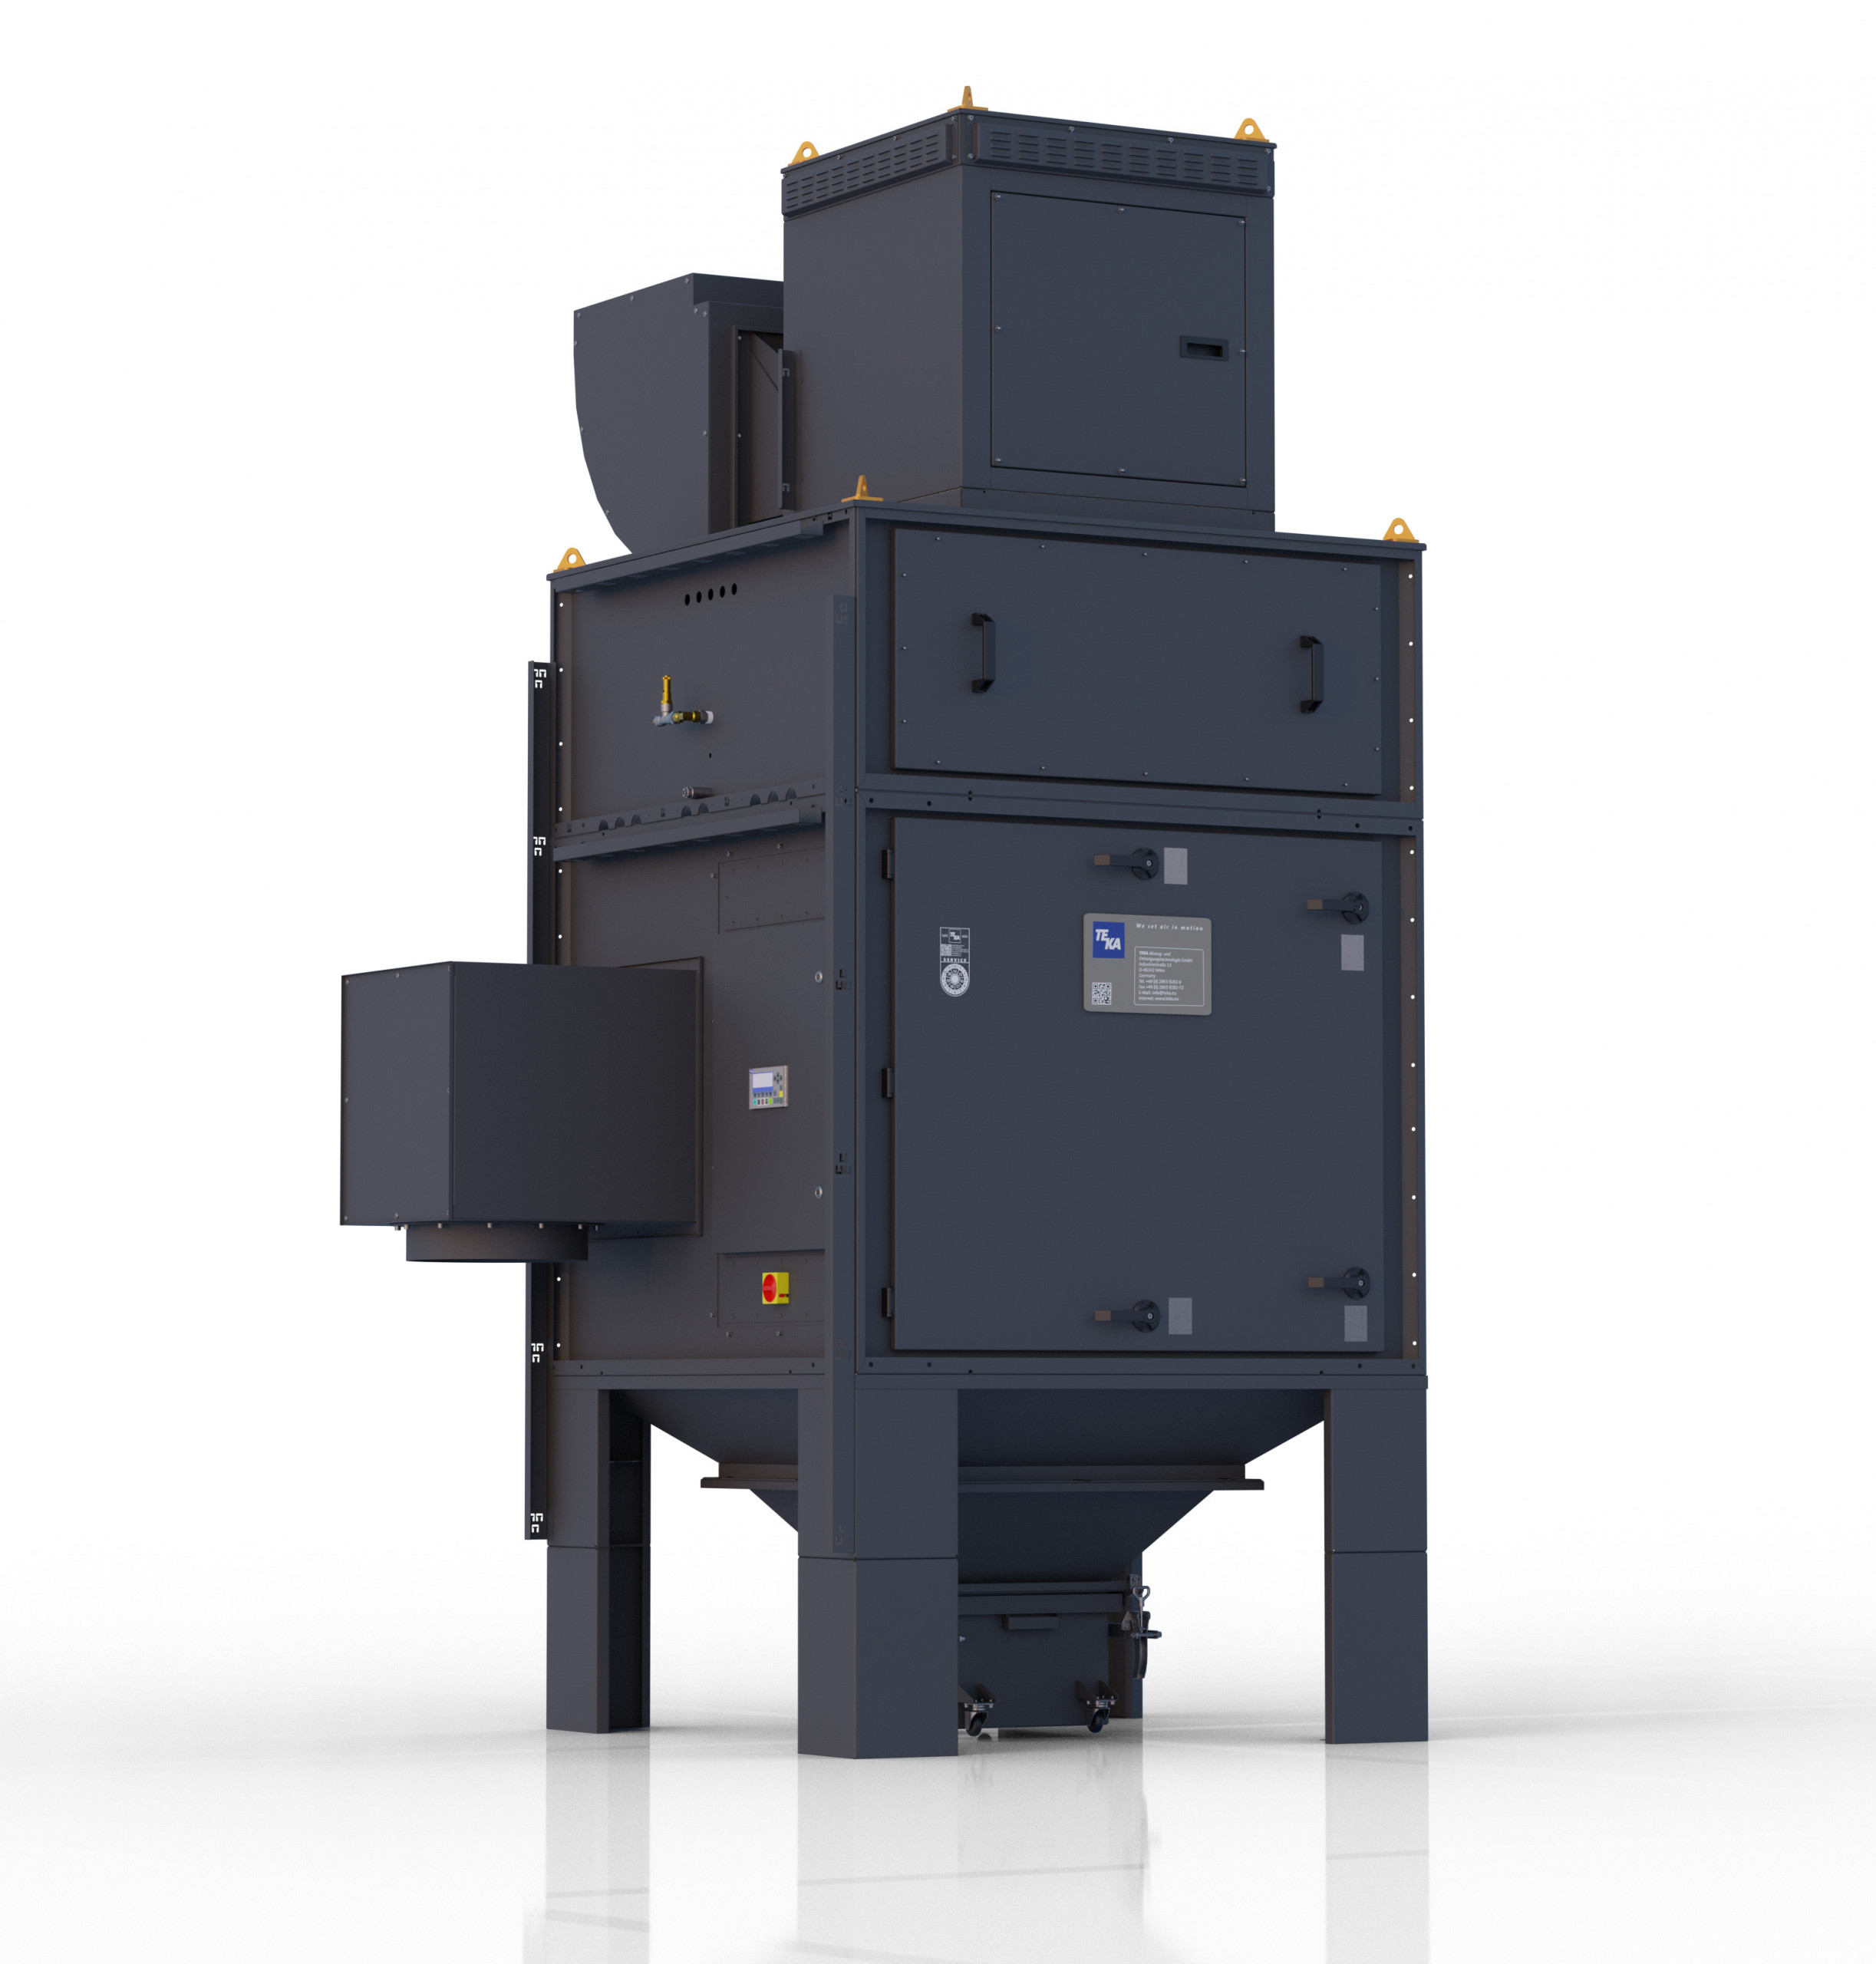 The new AirCube is offered in 5.5 kW, 7.5 kW and 11 kW power ratings and is suitable for various applications. © Teka